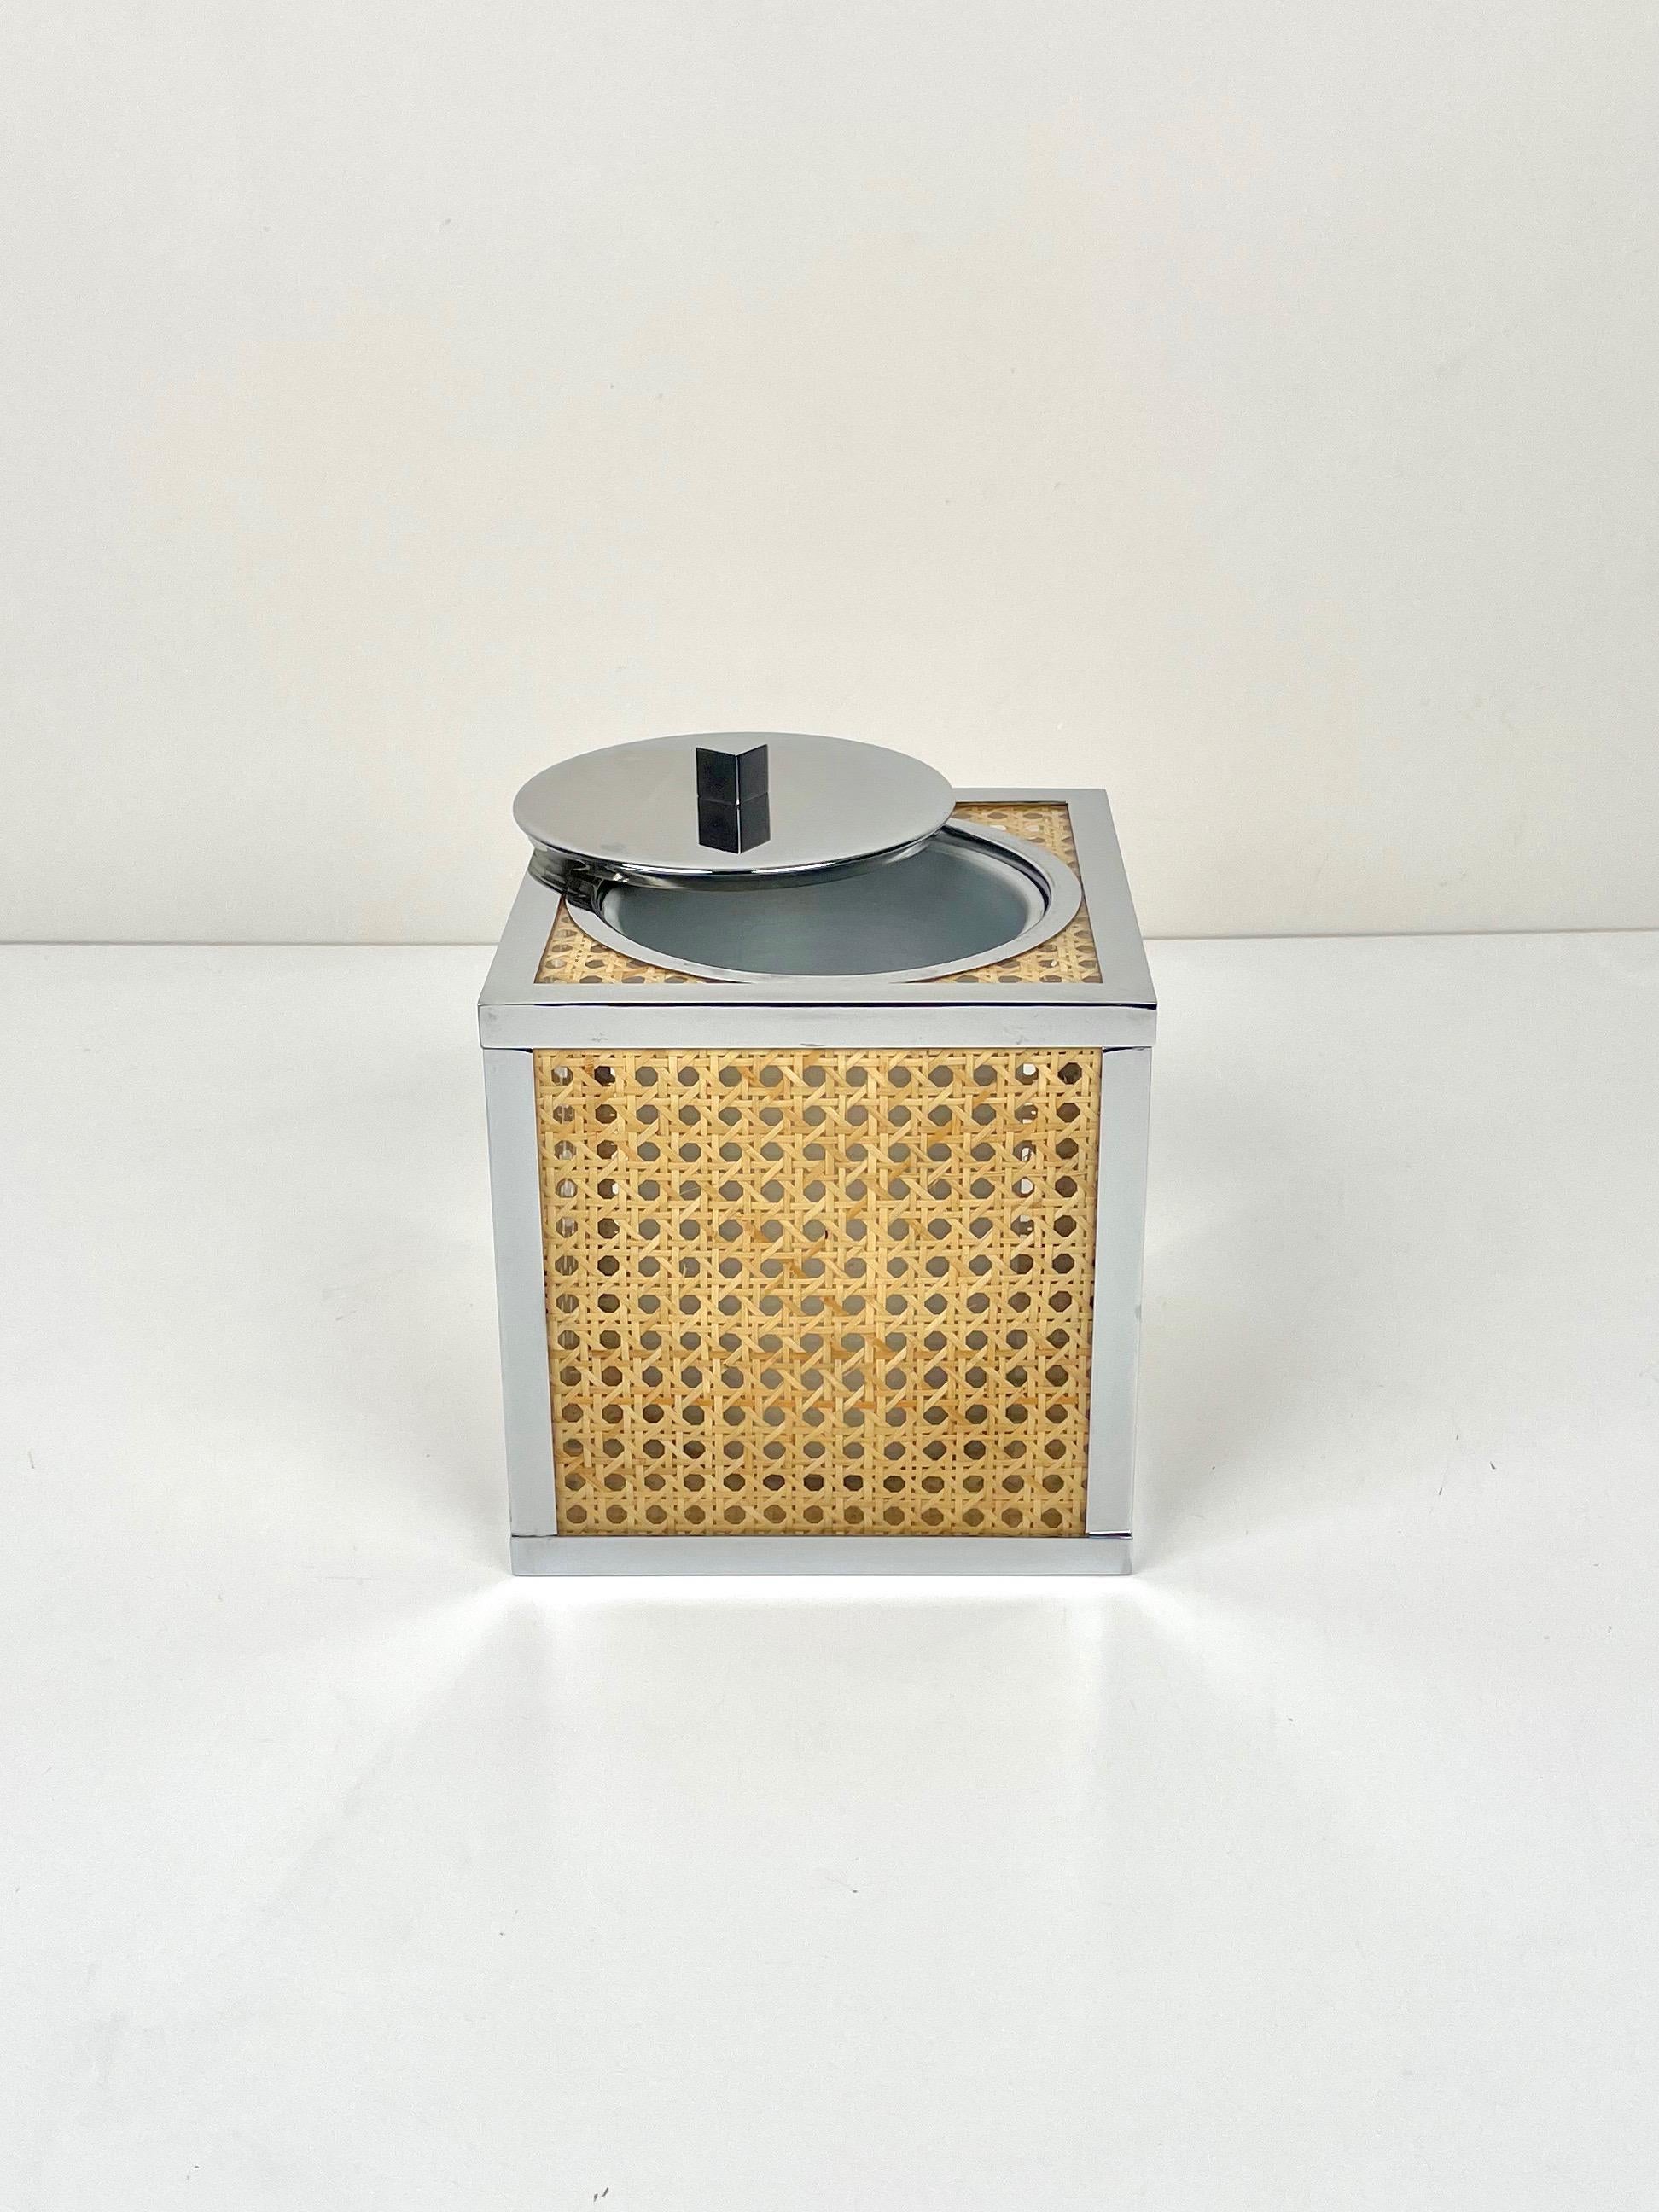 Chrome Lucite Wicker Rattan Barware Ice Bucket Christian Dior Style France 1970s For Sale 2